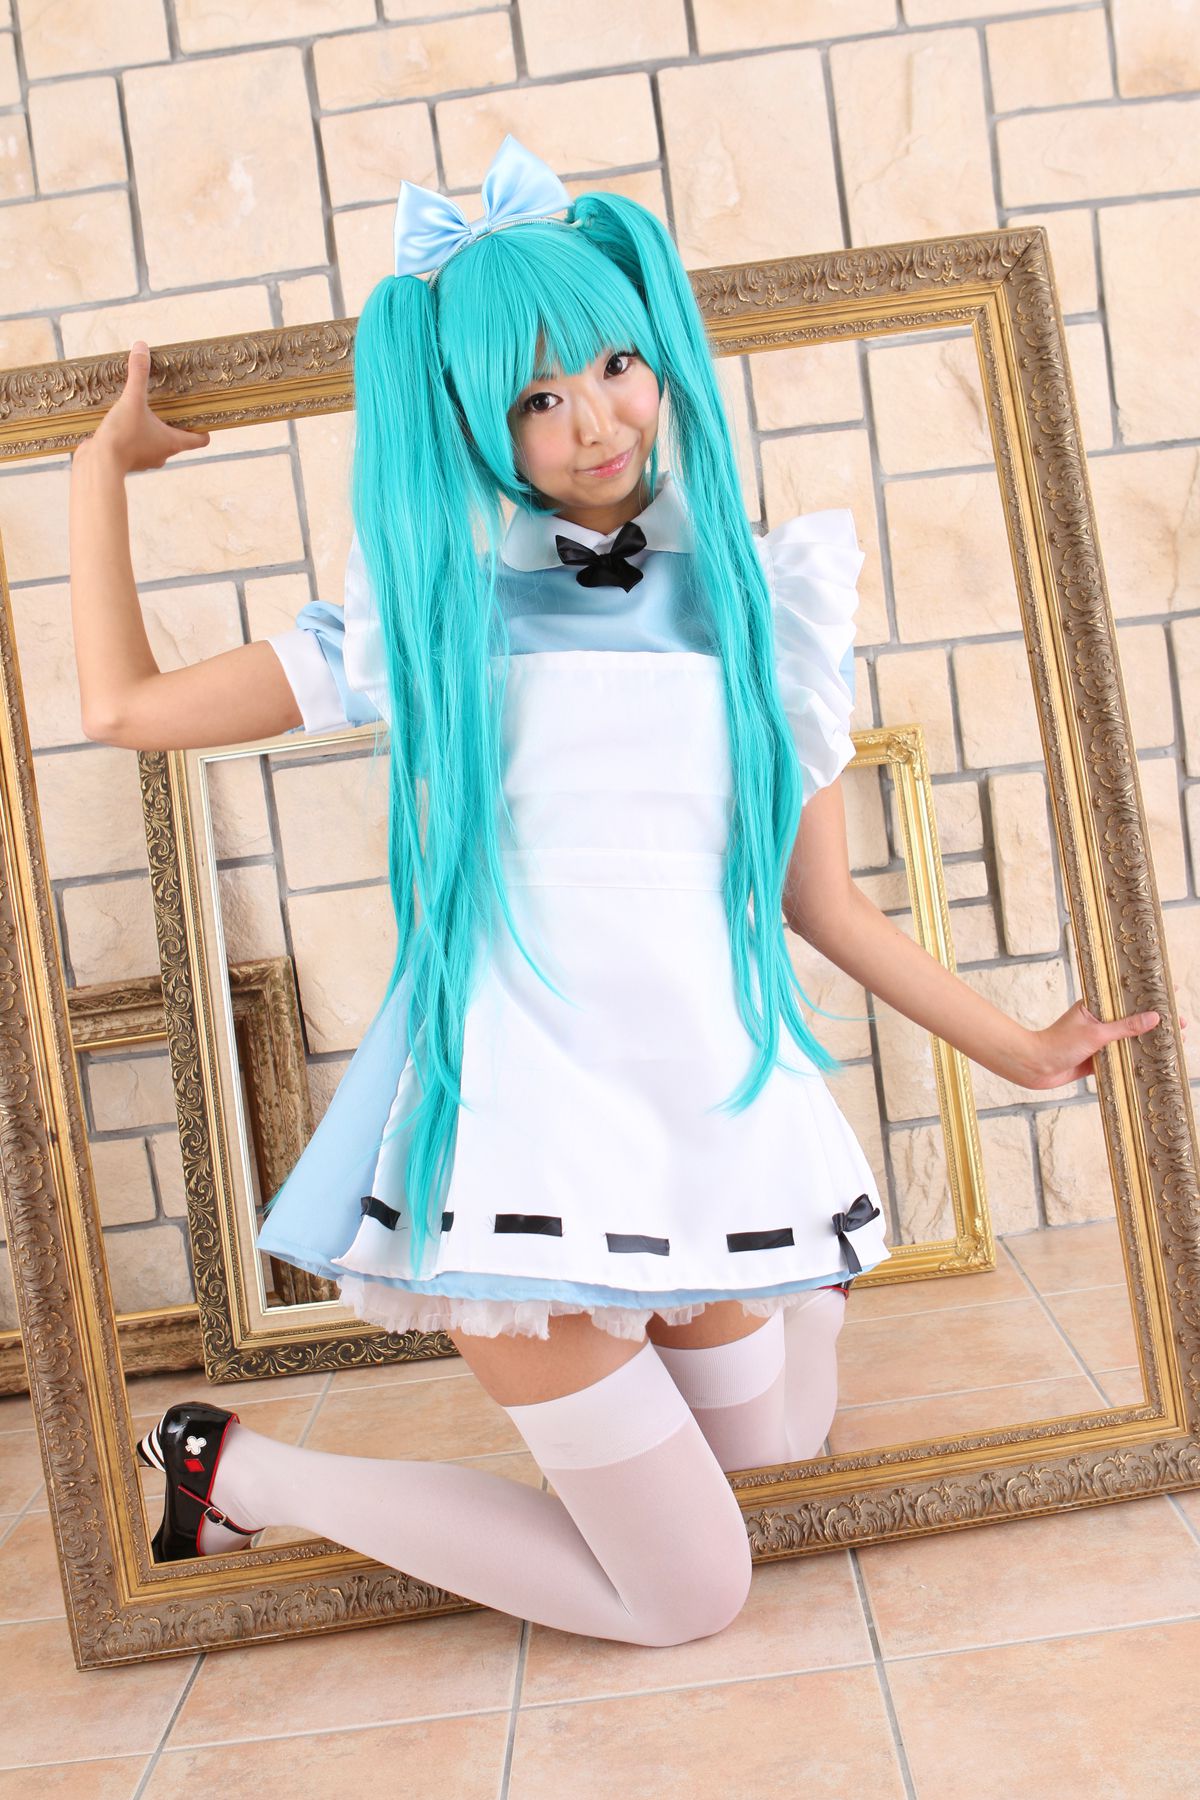 taotuhome[Cosplay套图] New Hatsune Miku from Vocaloid - So Sexy第83张